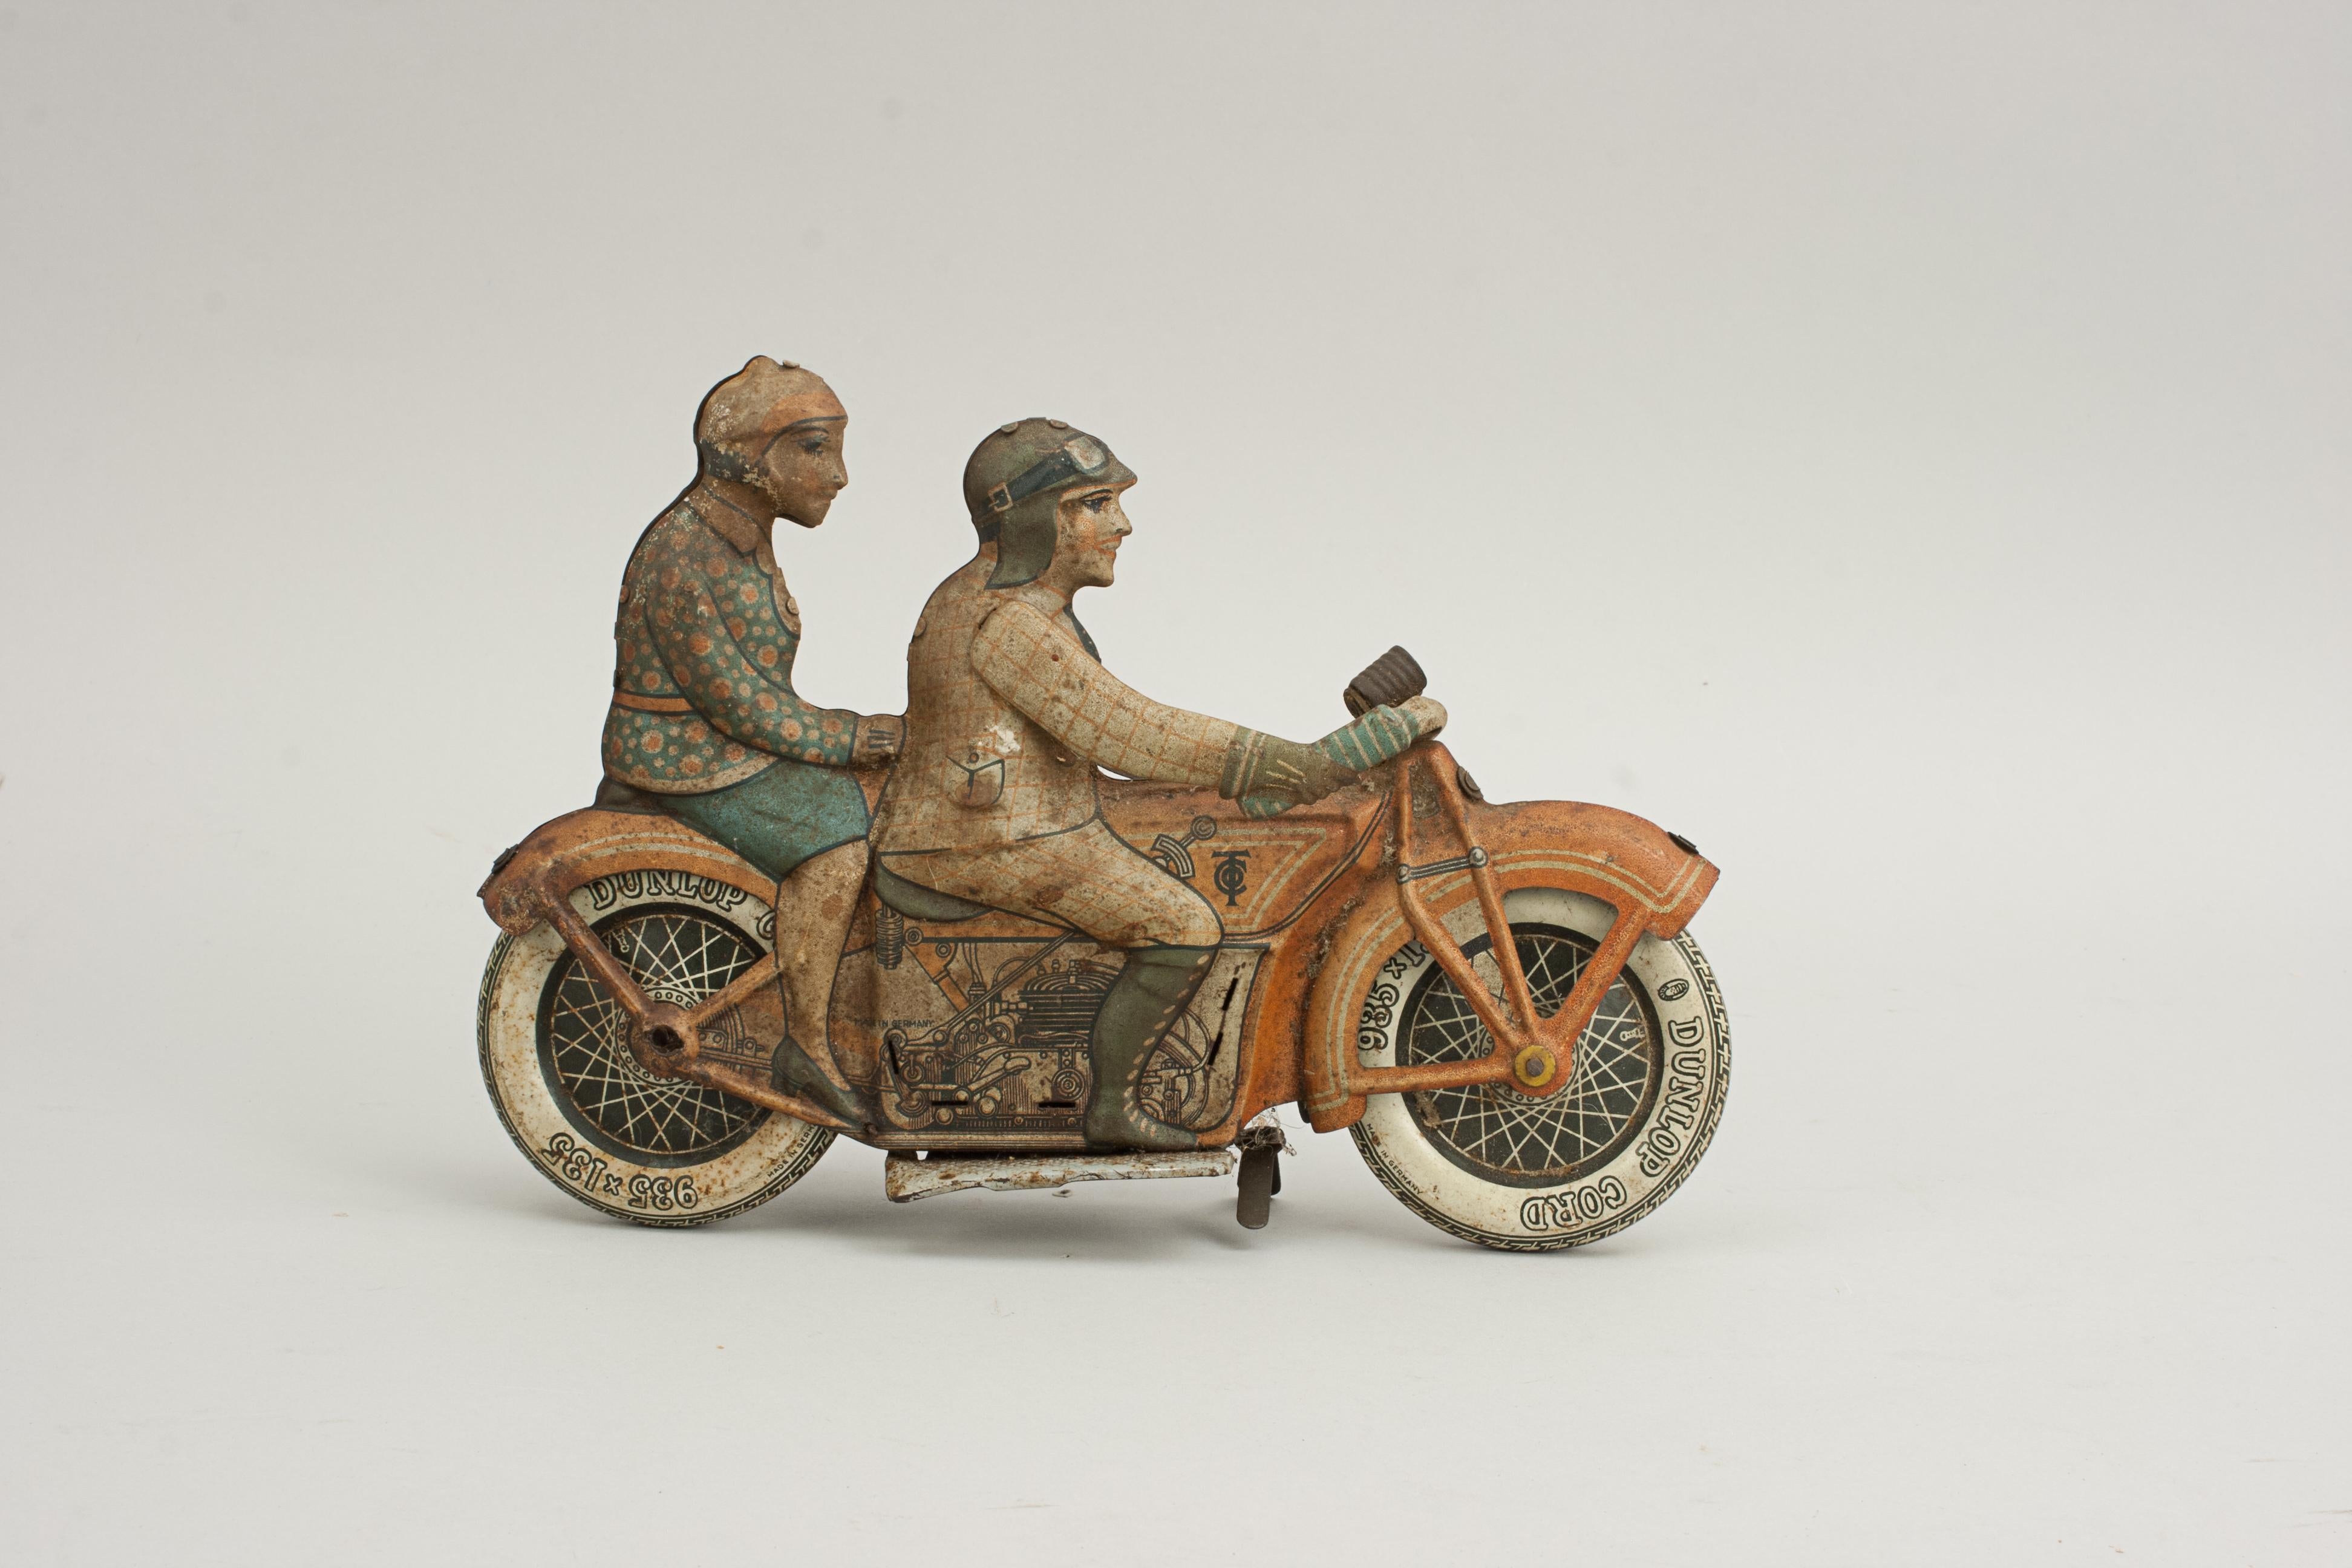 Tipp & Co Clockwork Motorcycle With Rider & Pillion Passenger For Sale 6